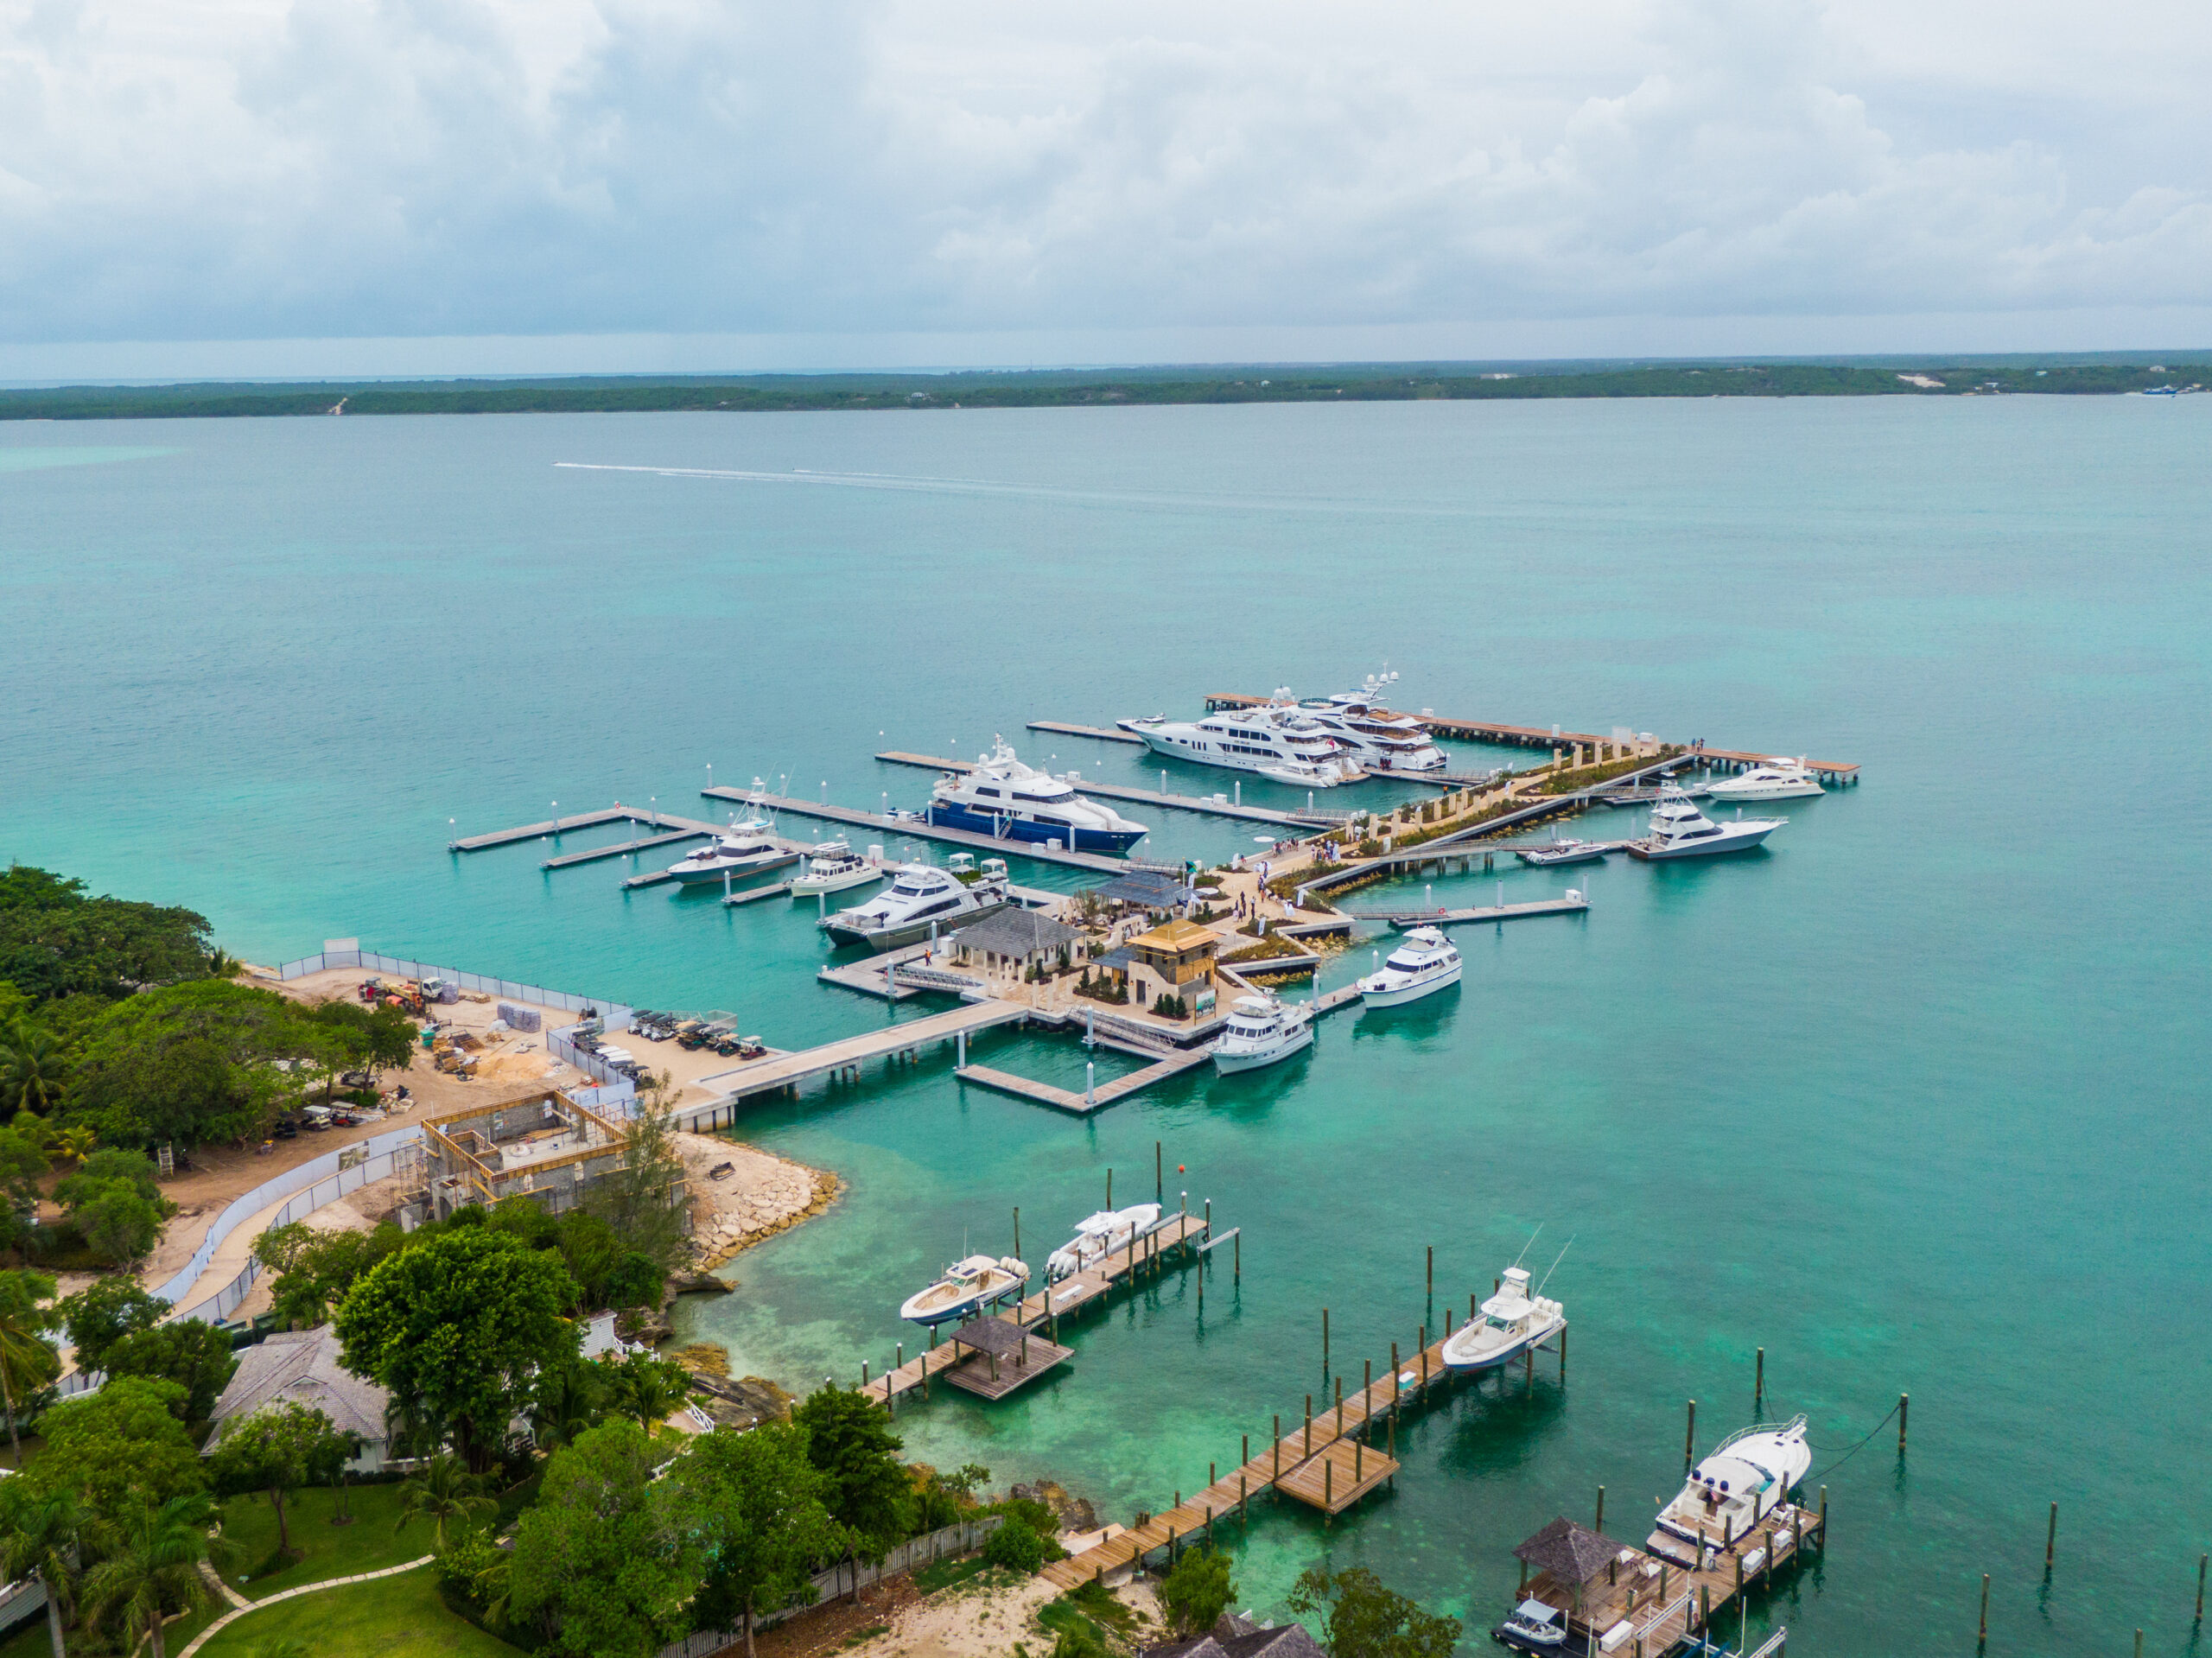 Aluminum marina with large yachts moored in turquoise sea in the Bahamas